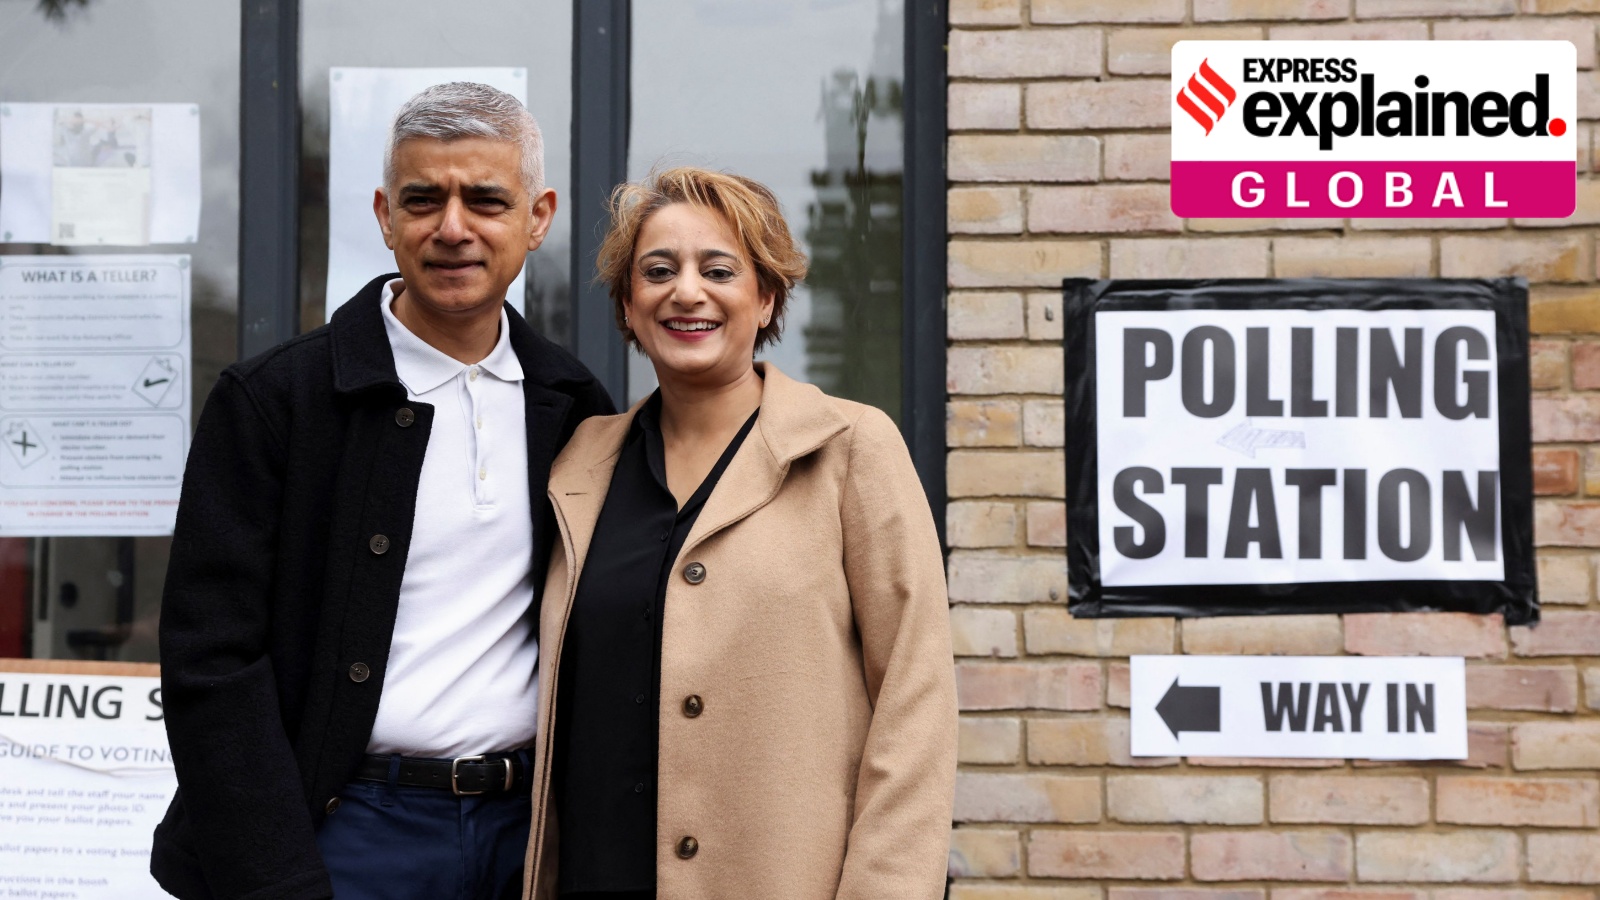 android, who is sadiq khan, the pakistani-origin mayor of london now re-elected to the post?